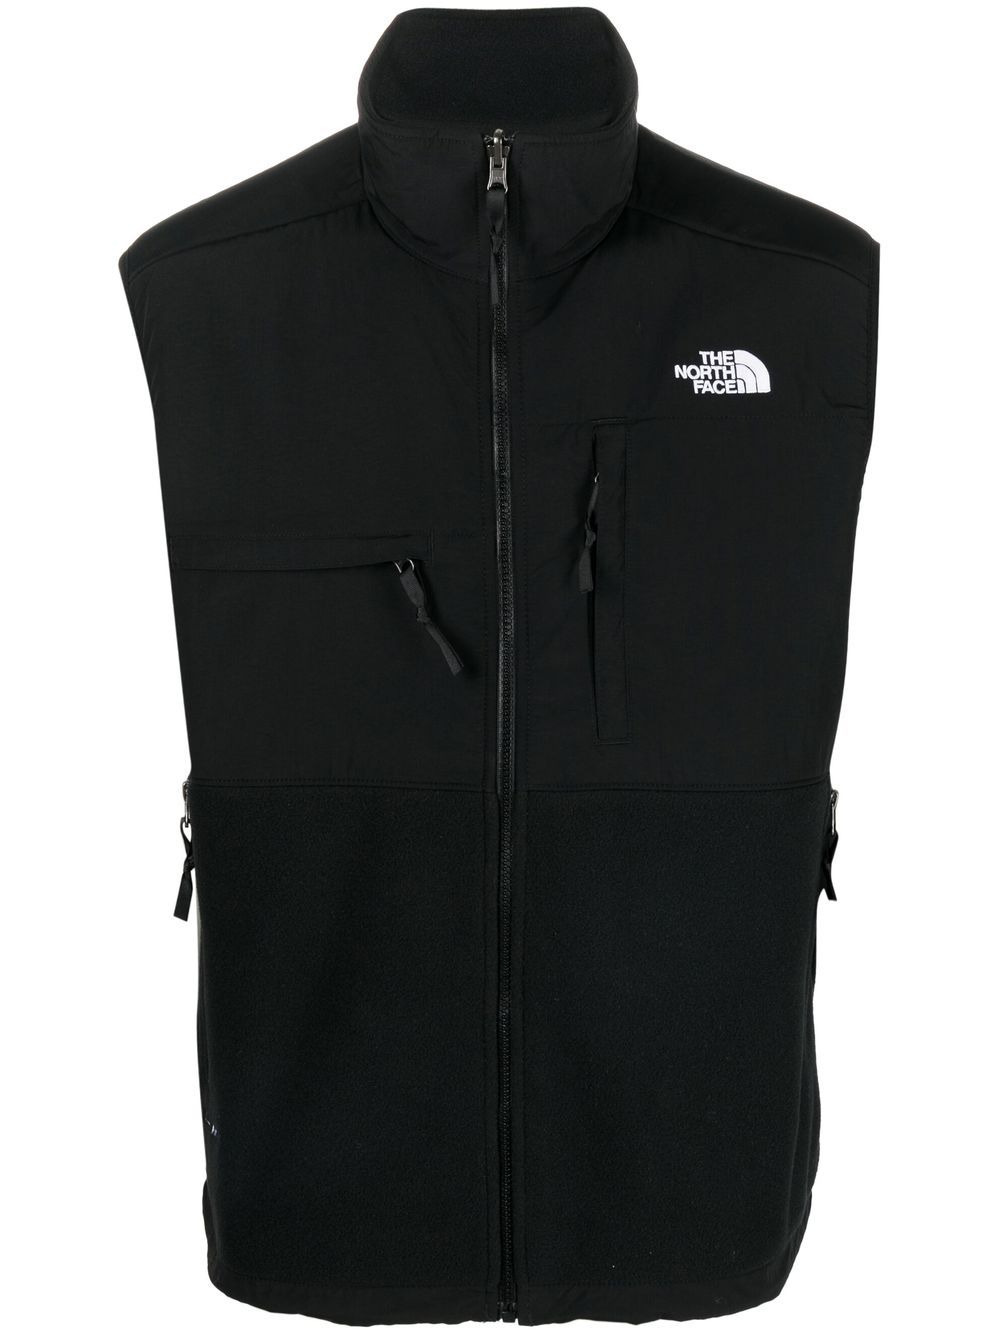 The North Face embroidered-logo zip-up gilet - Black | The Hoxton Trend